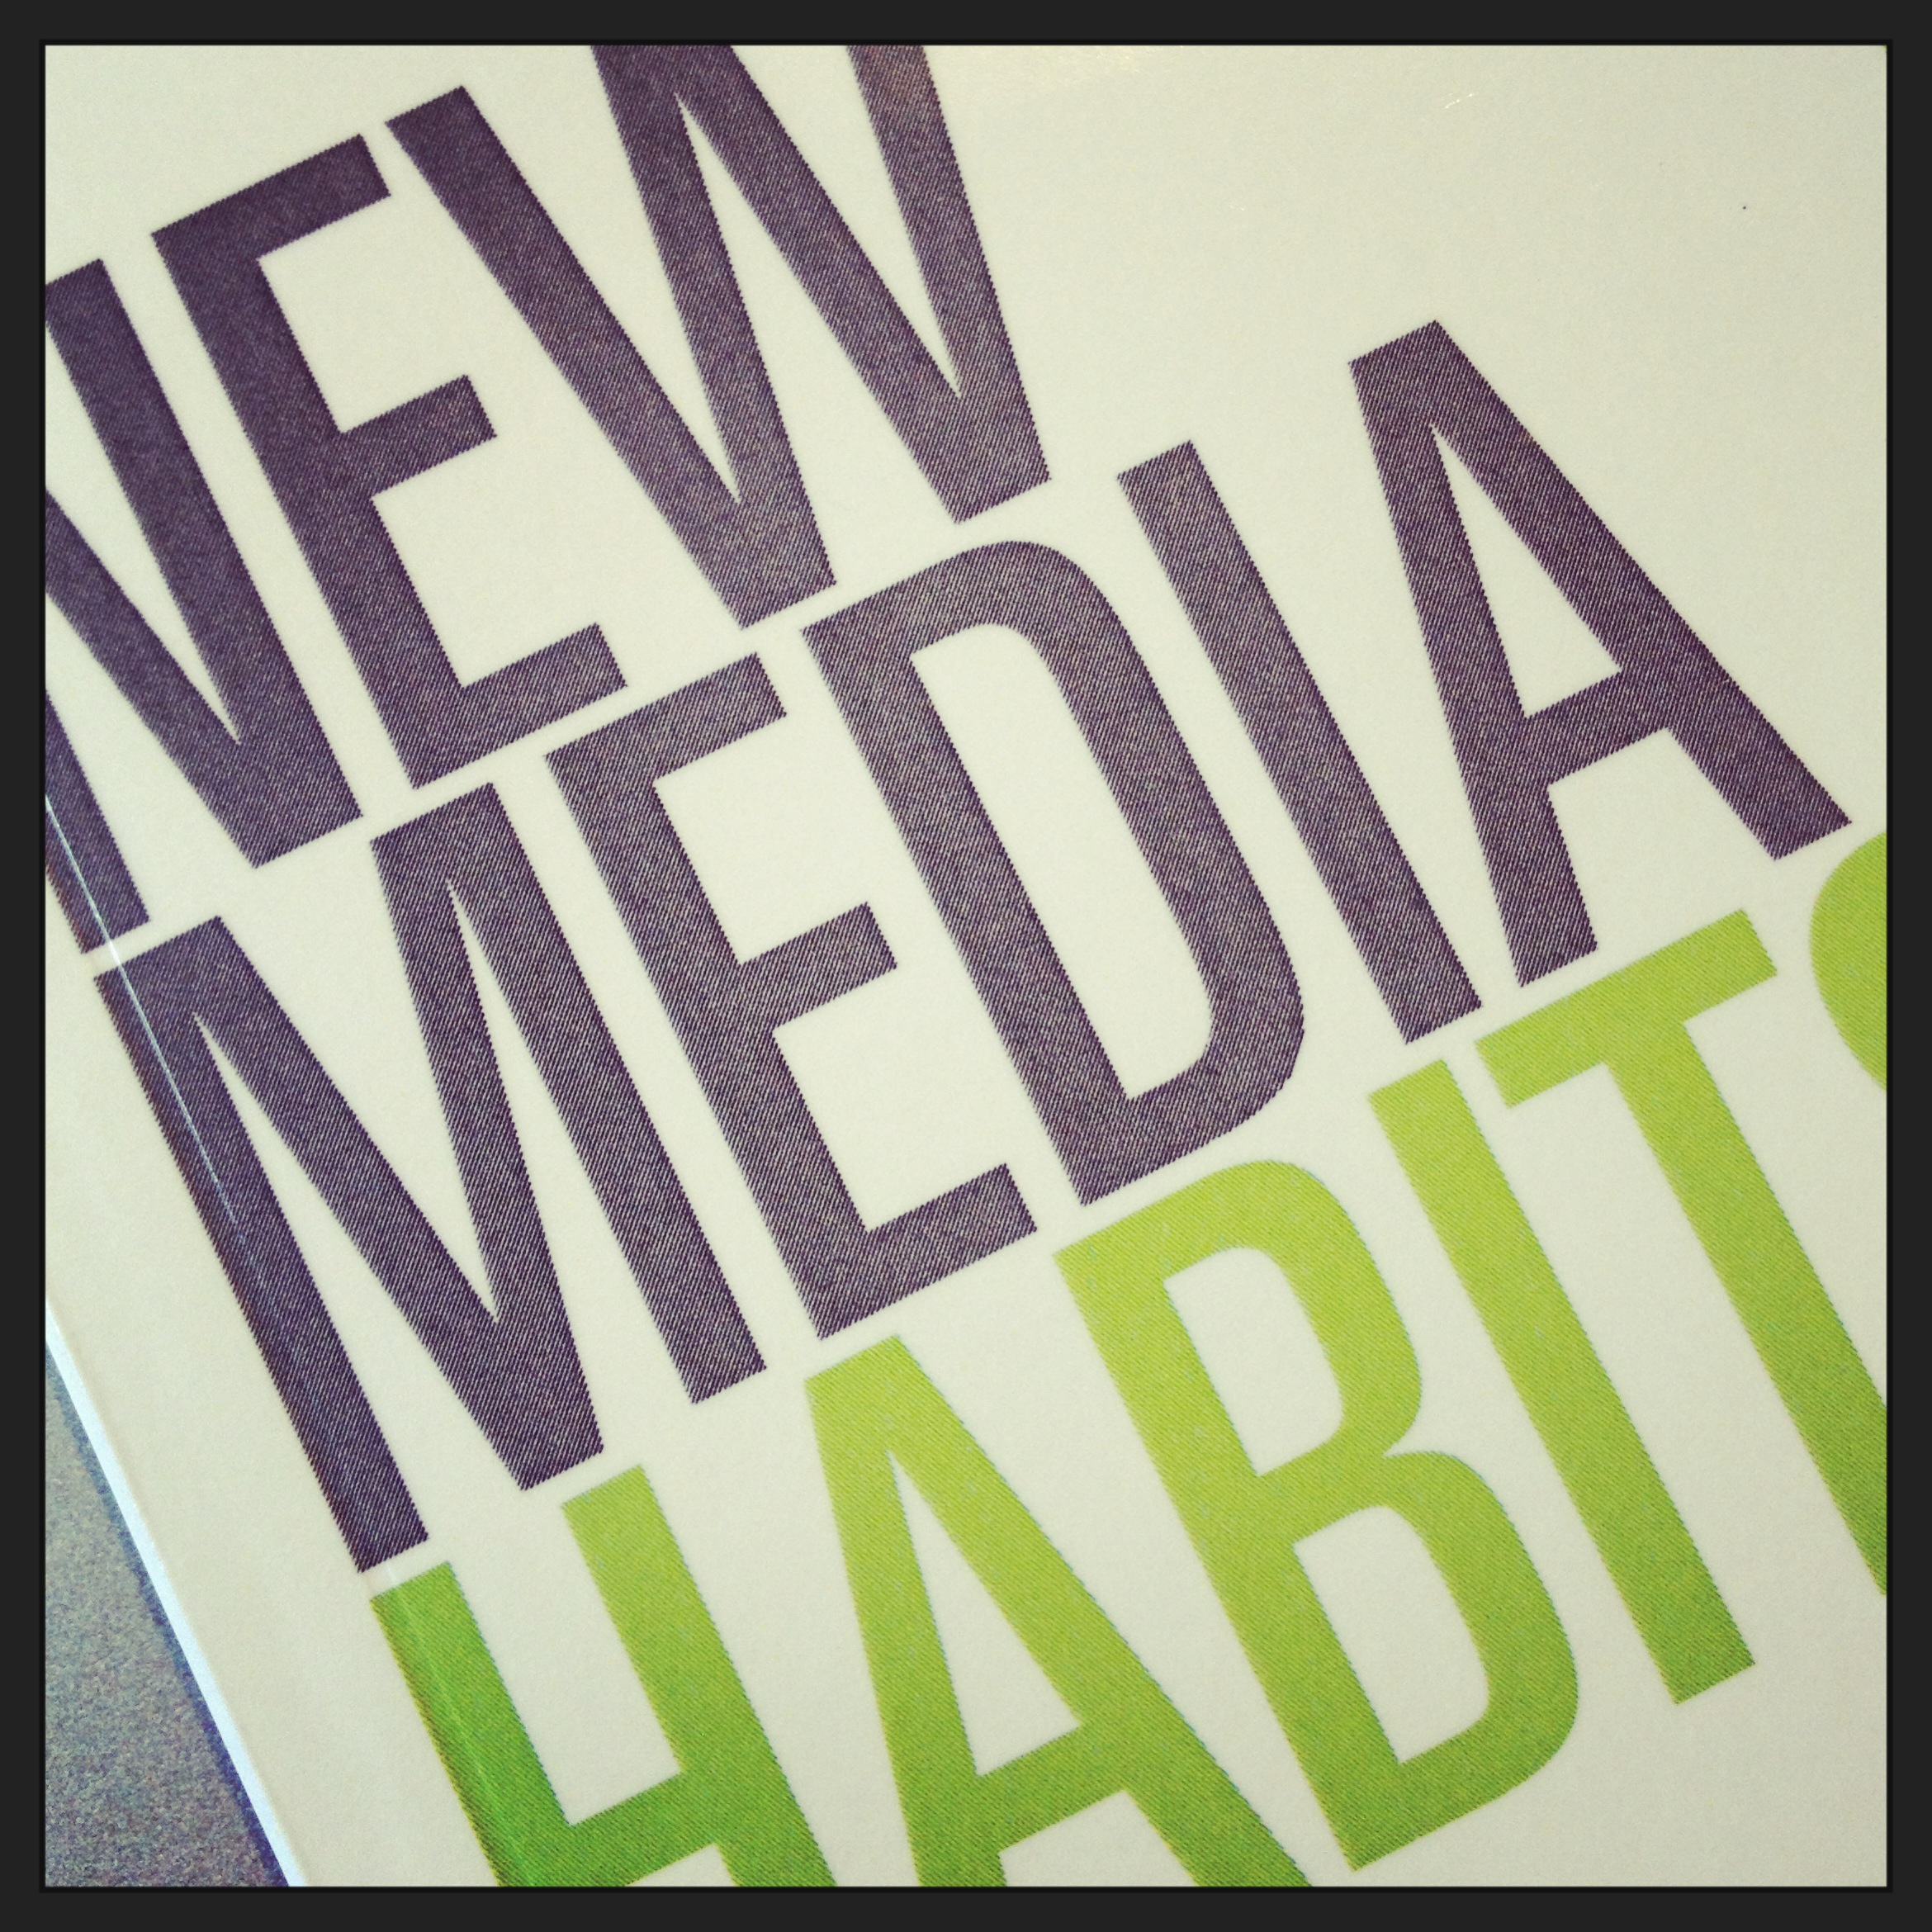 Revisiting the New Media Habits